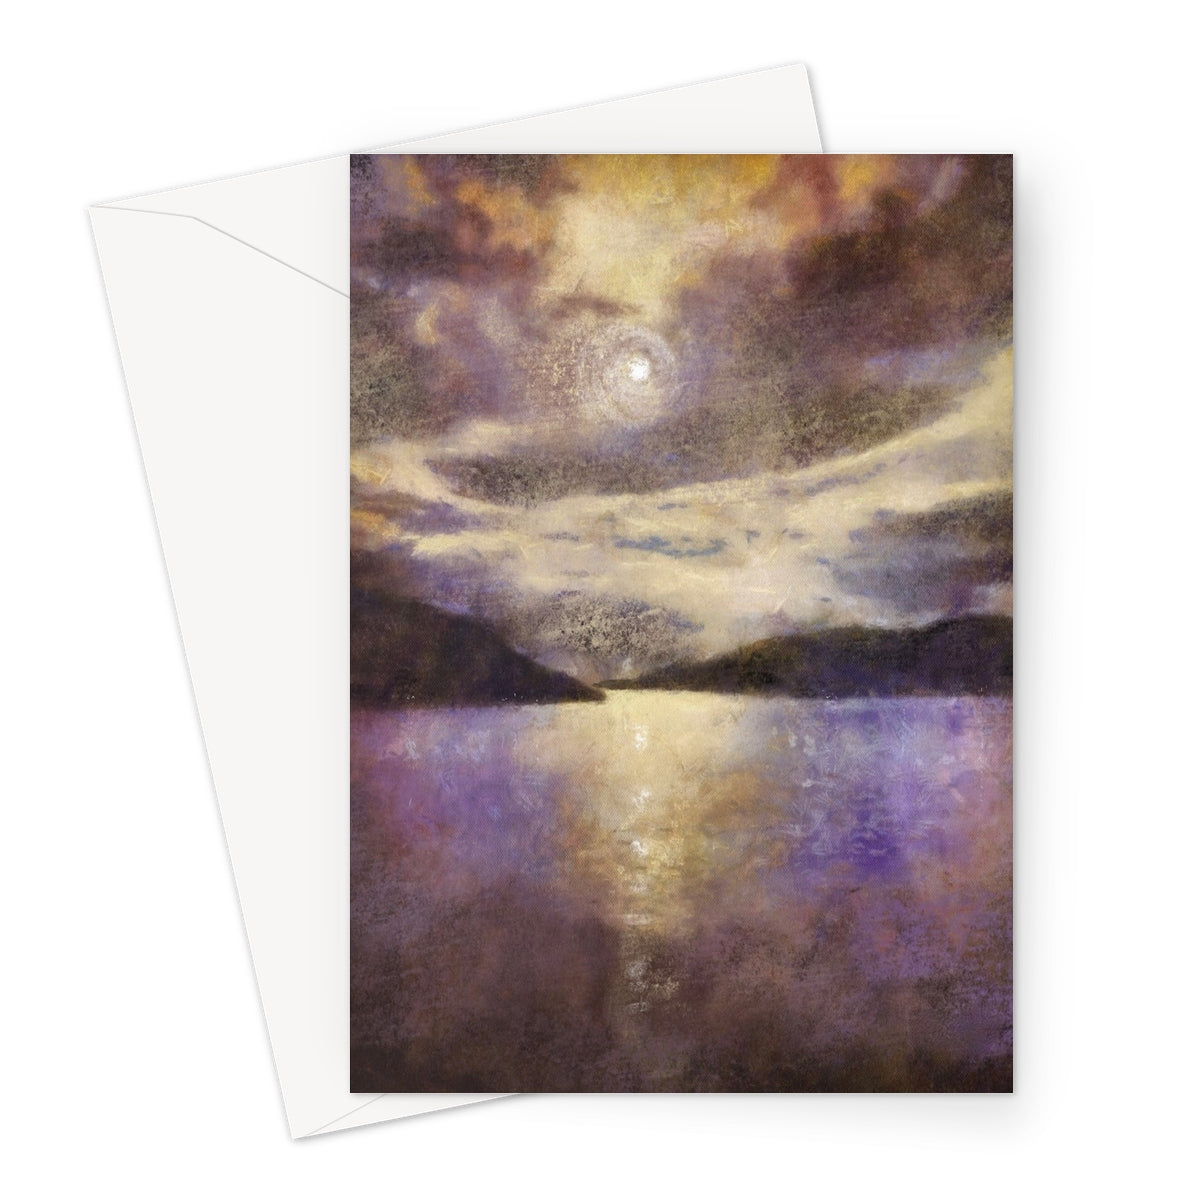 Moonlight Meets Lewis & Harris Art Gifts Greeting Card-Greetings Cards-Hebridean Islands Art Gallery-A5 Portrait-1 Card-Paintings, Prints, Homeware, Art Gifts From Scotland By Scottish Artist Kevin Hunter